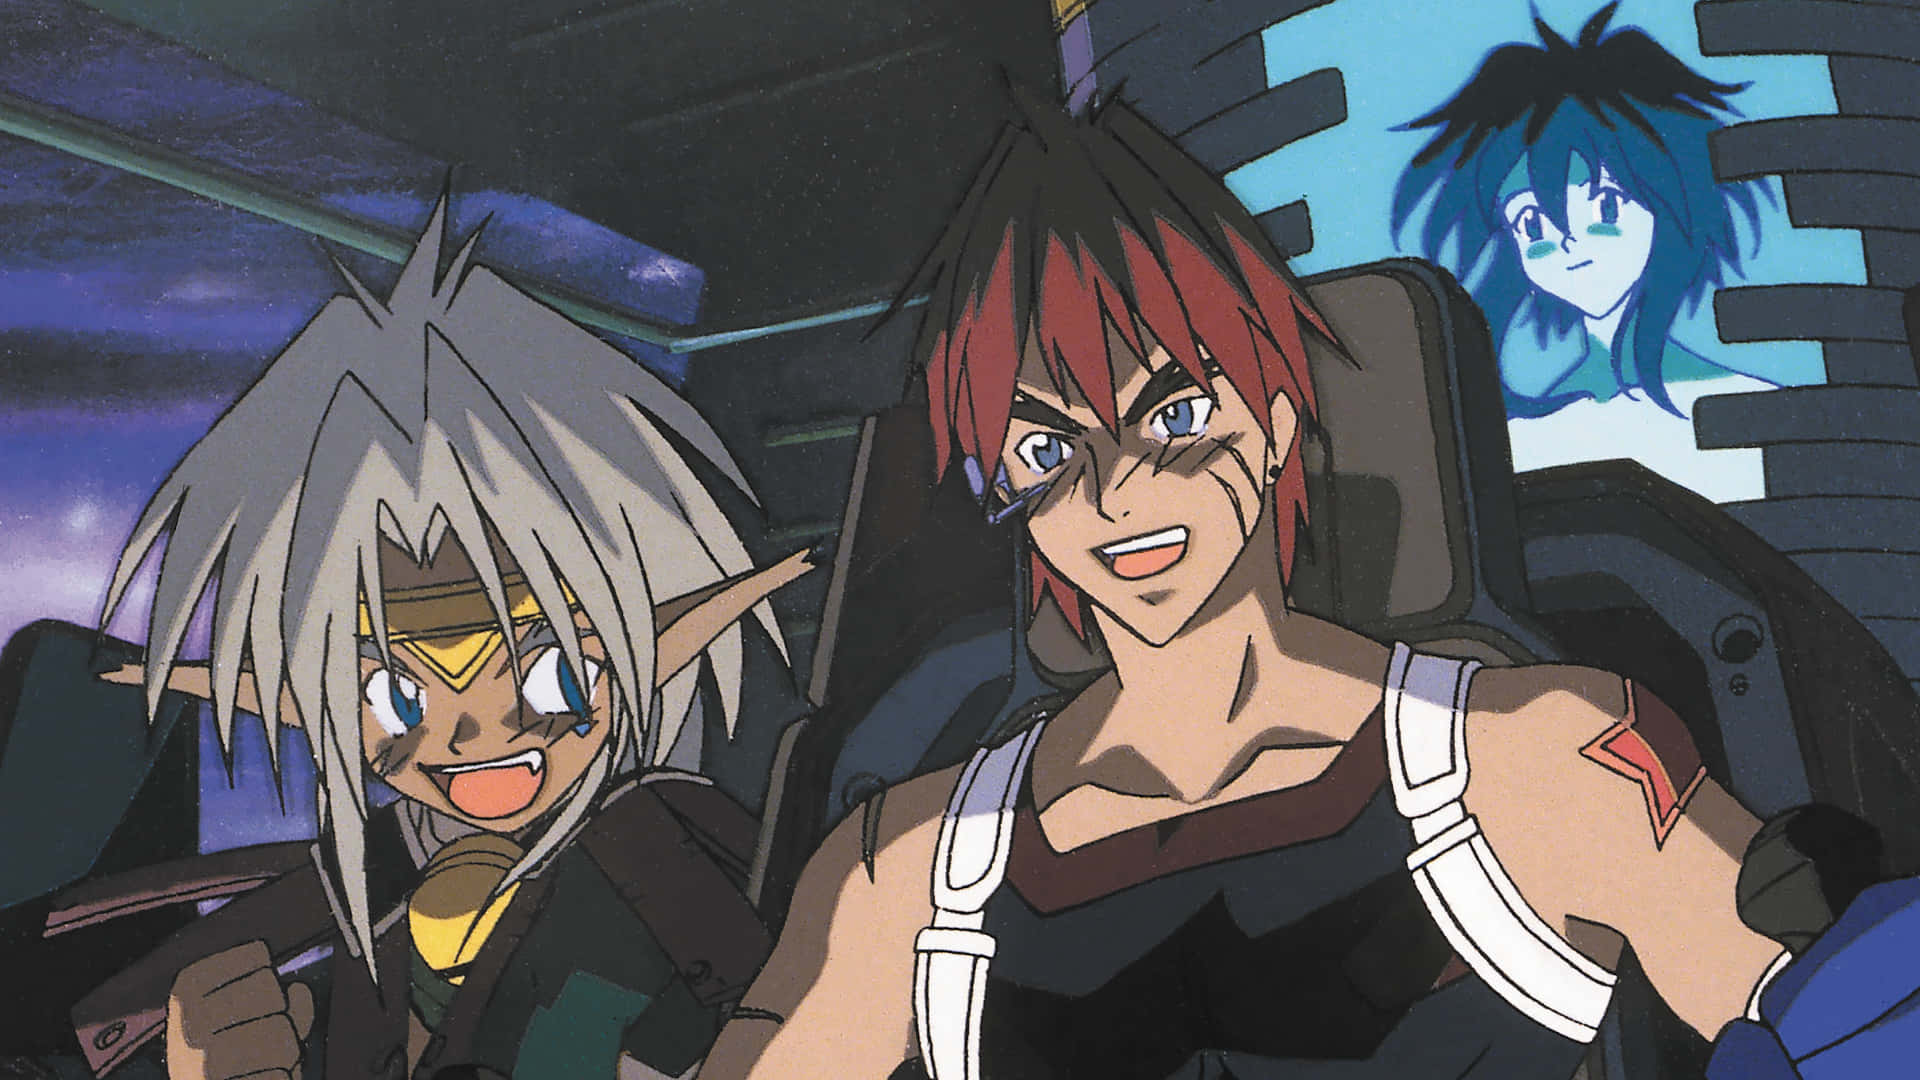 Image  Outlaw Star characters in a face-off. Wallpaper